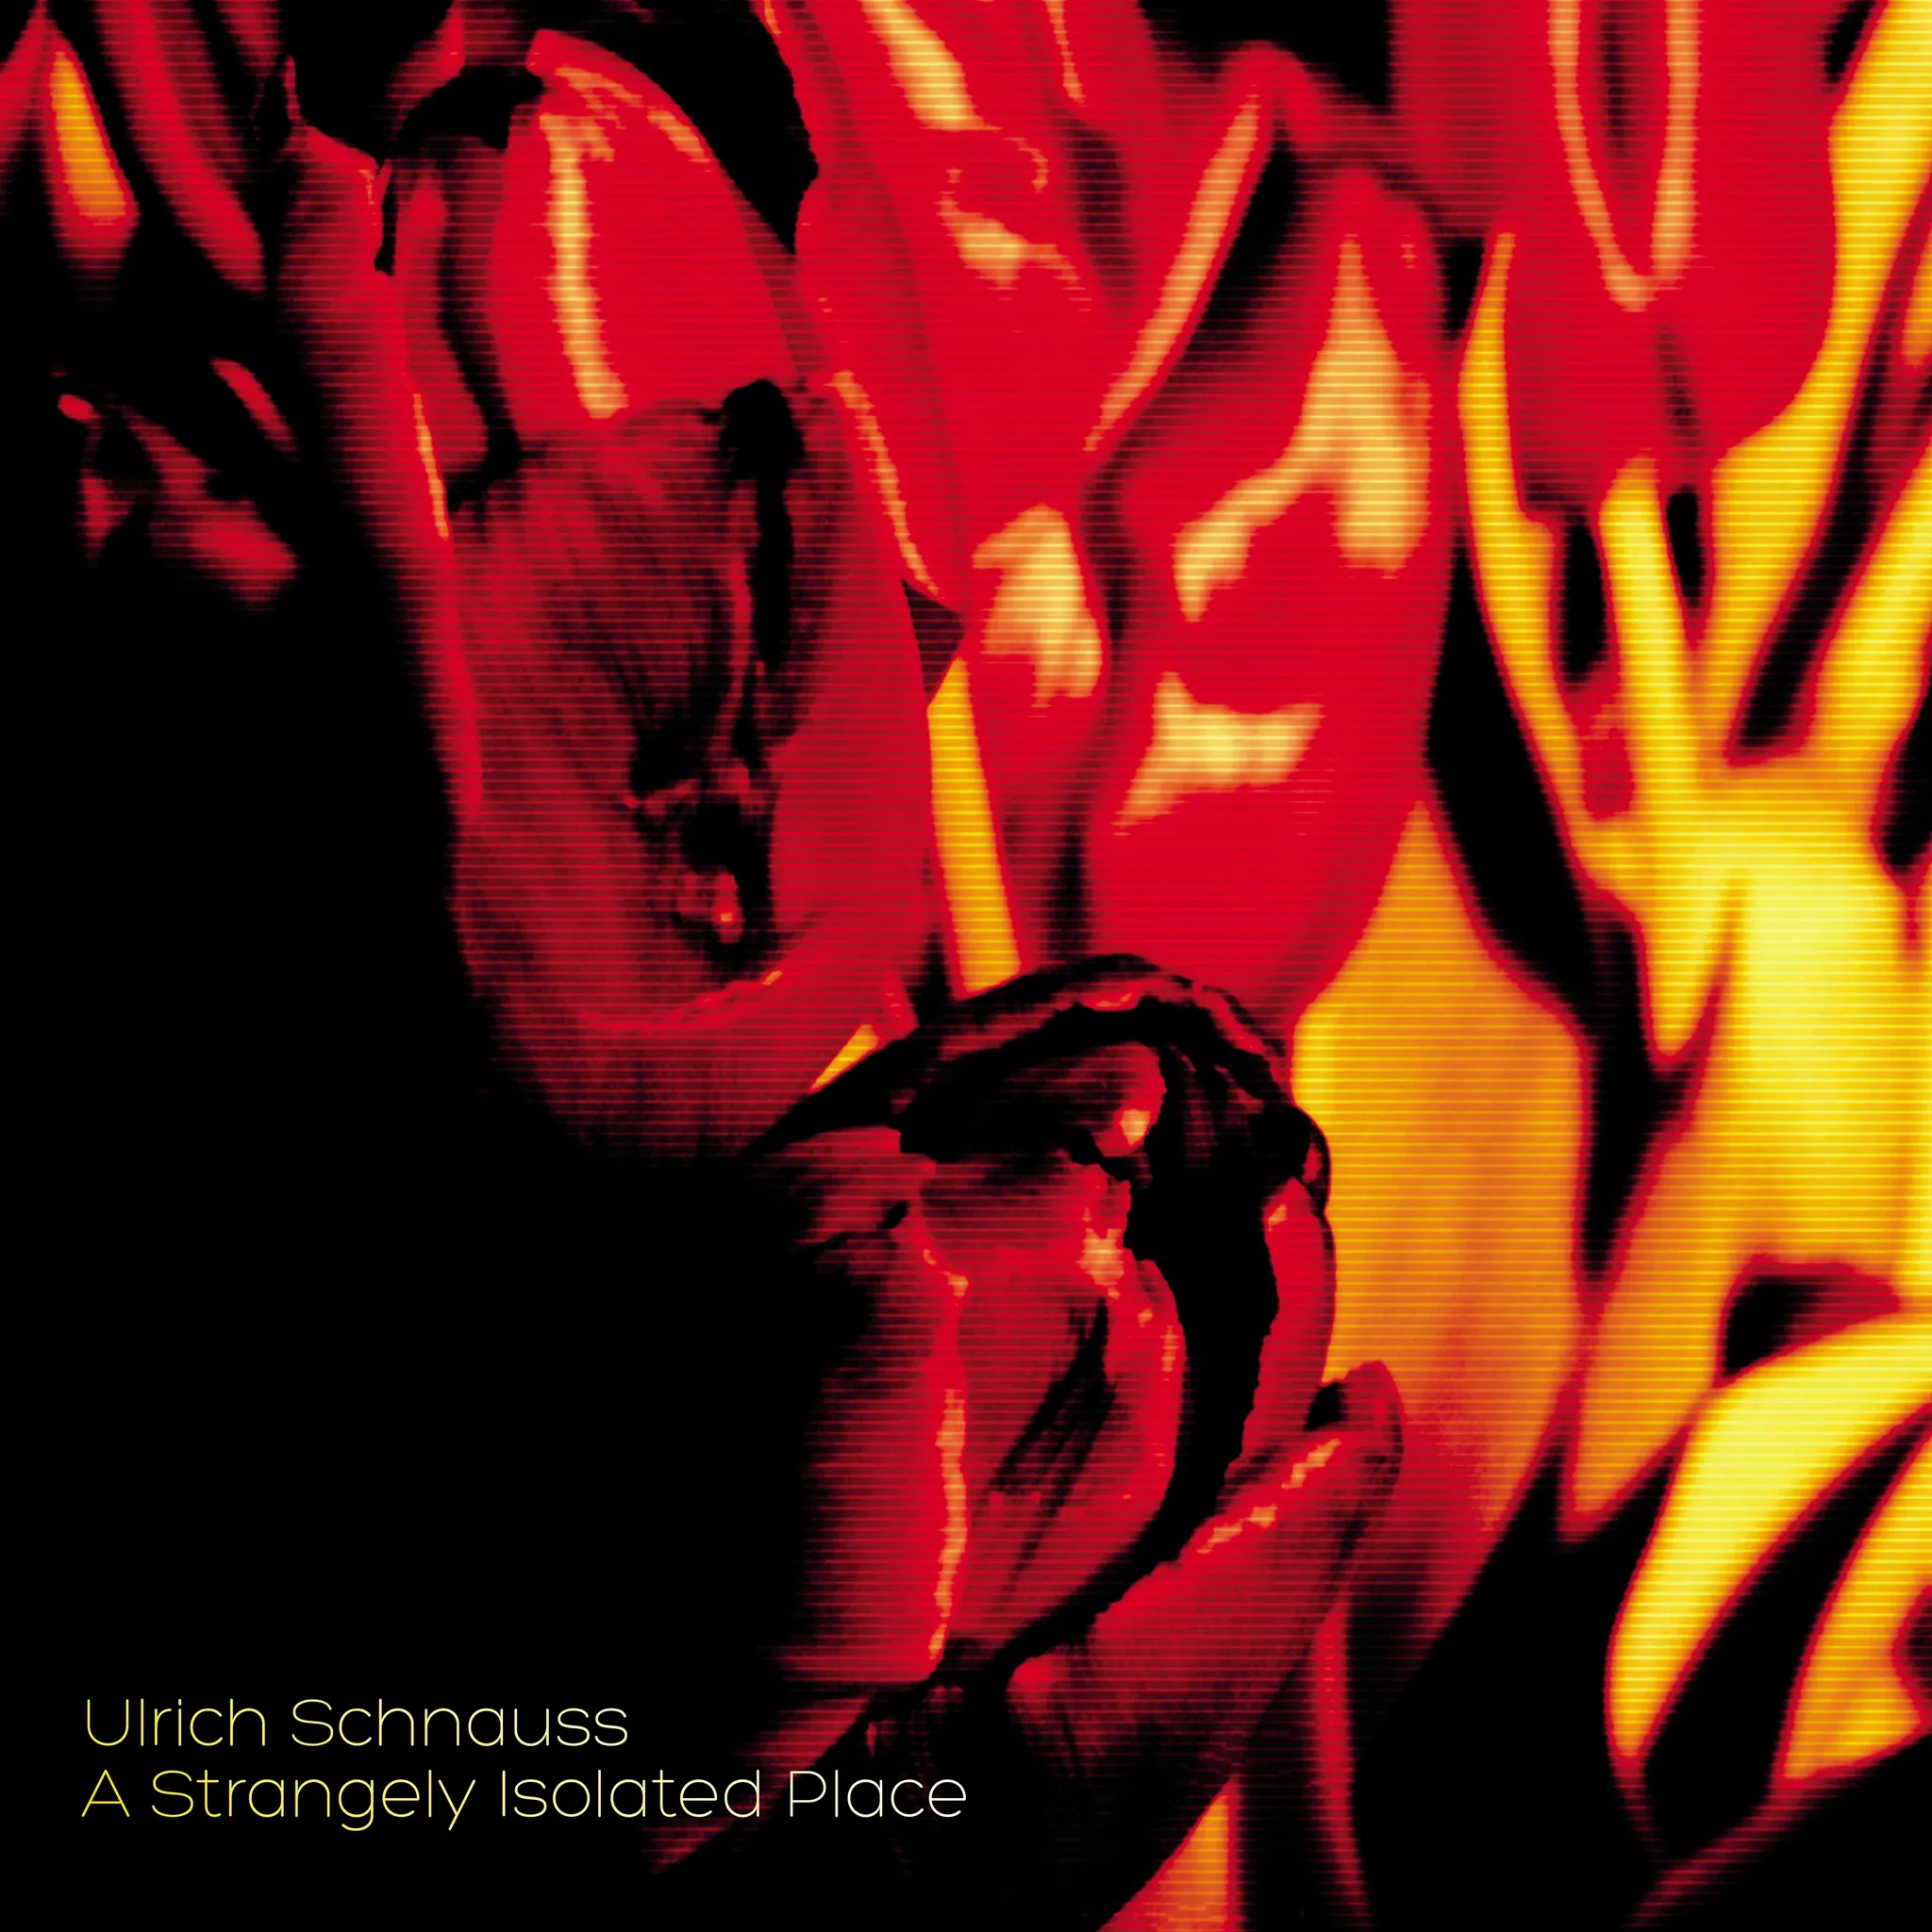 <strong>Ulrich Schnauss - A Strangely Isolated Place</strong> (Vinyl LP - black)